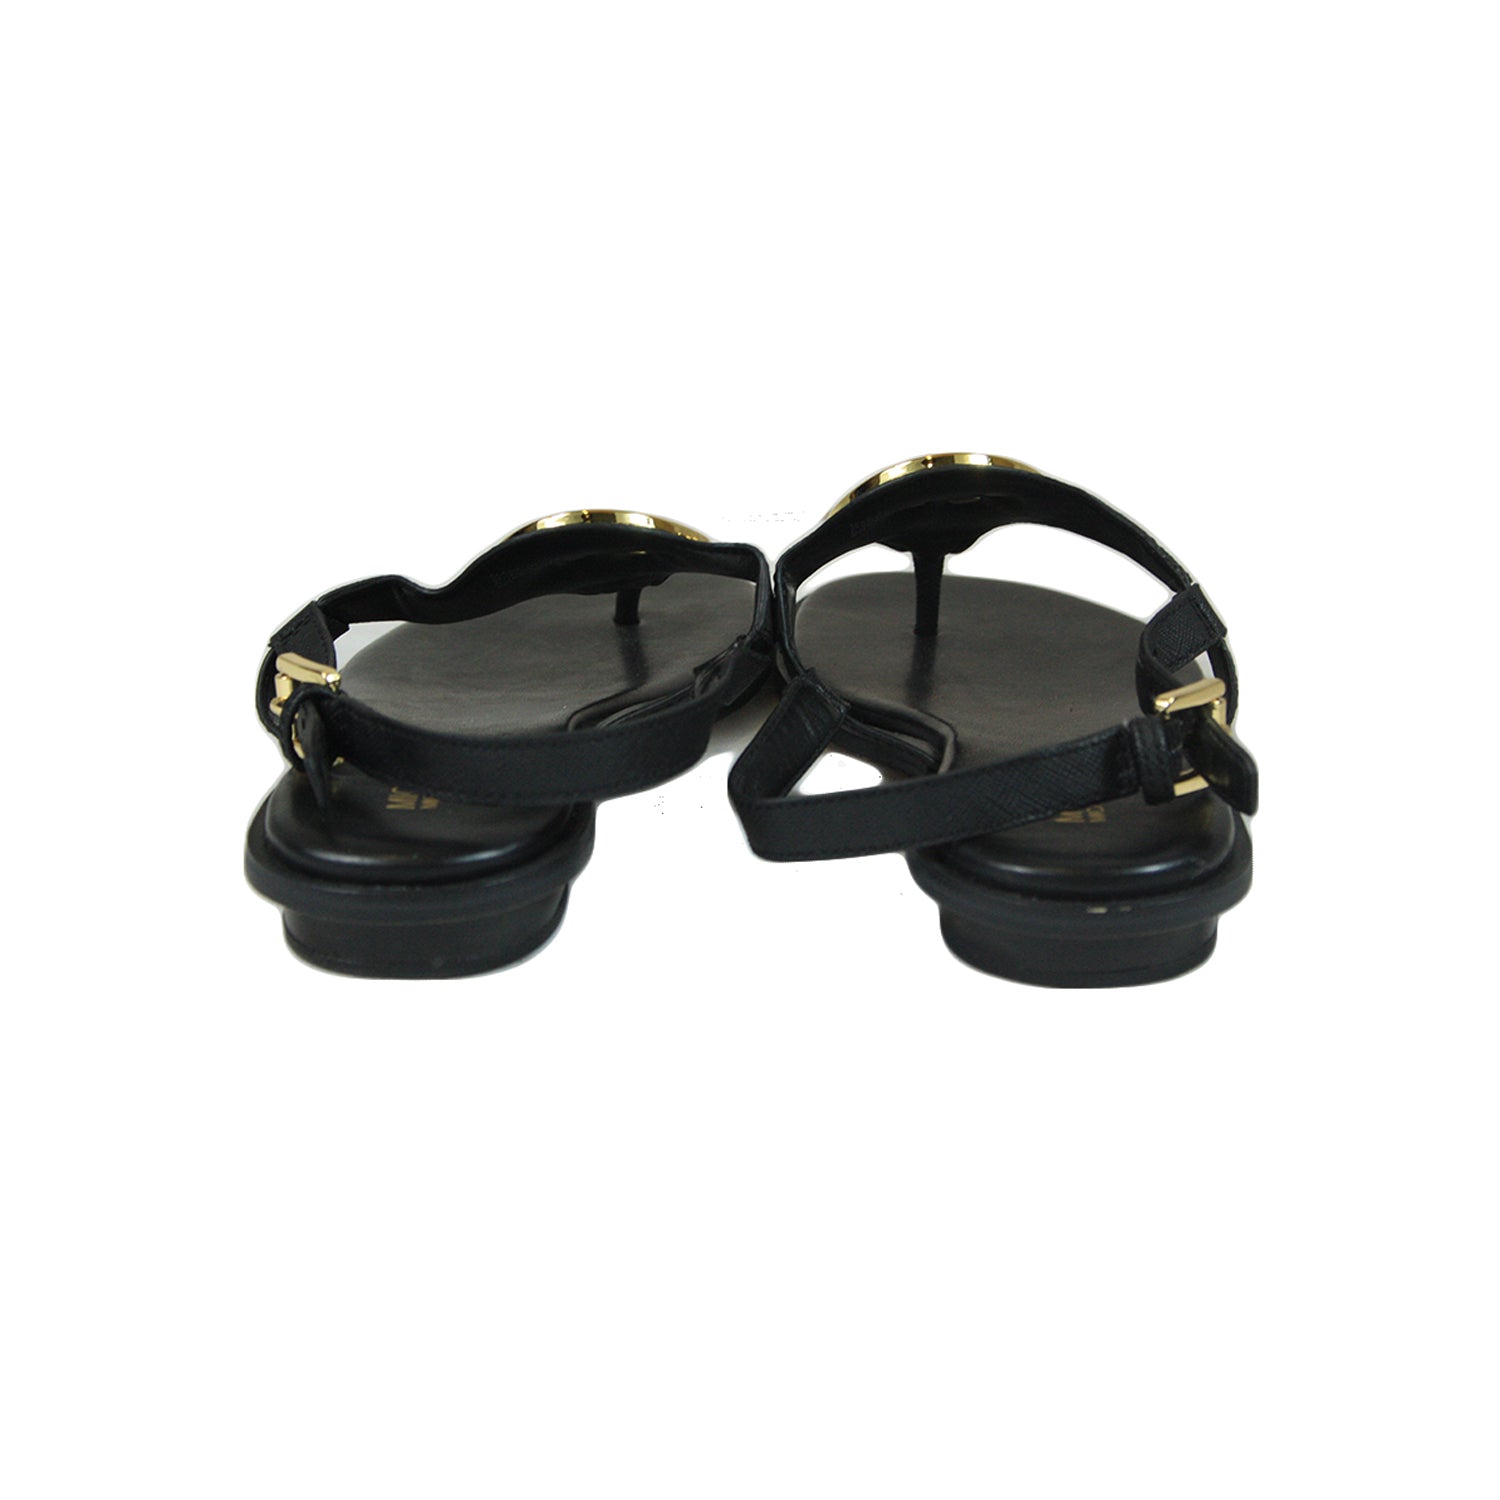 Sandals with gold logo-6M